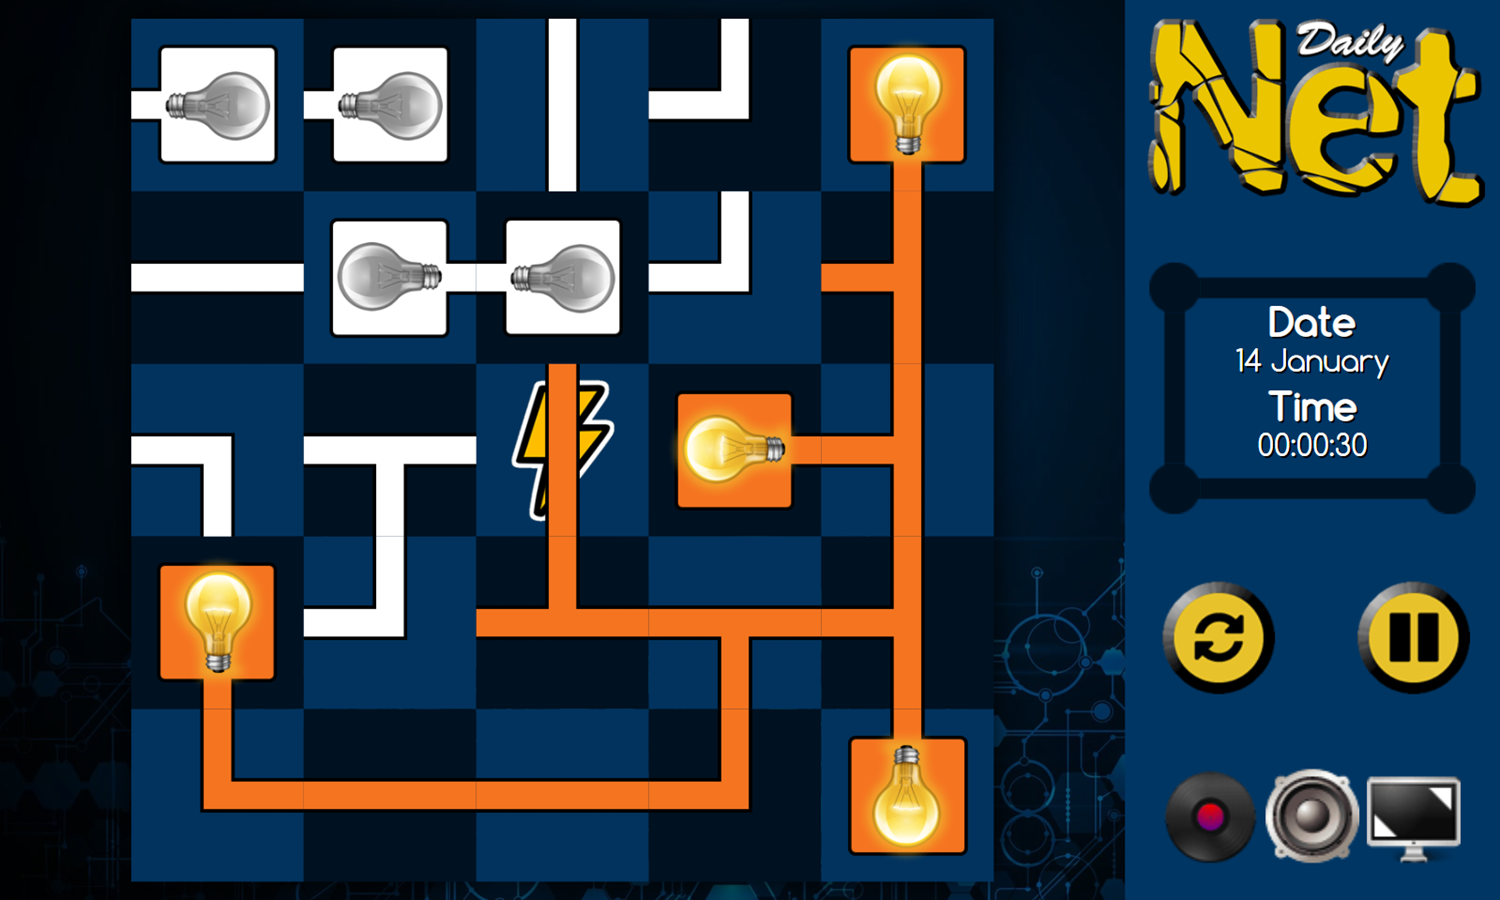 Daily Net Game Solving Puzzle Screenshot.